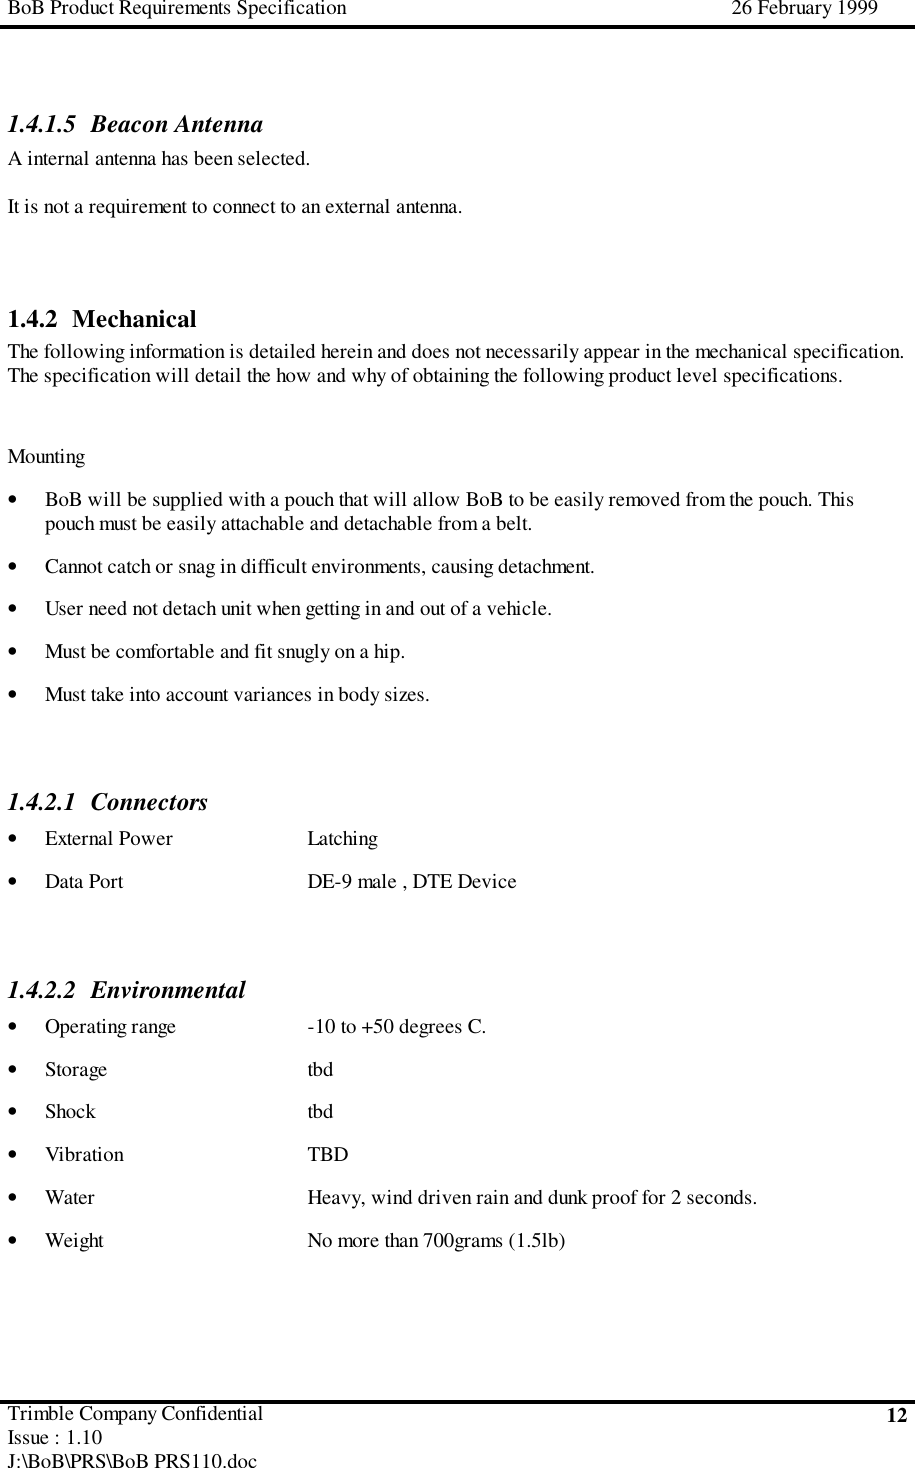 BoB Product Requirements Specification 26 February 1999Trimble Company ConfidentialIssue : 1.10J:\BoB\PRS\BoB PRS110.doc121.4.1.5 Beacon AntennaA internal antenna has been selected.It is not a requirement to connect to an external antenna.1.4.2 MechanicalThe following information is detailed herein and does not necessarily appear in the mechanical specification.The specification will detail the how and why of obtaining the following product level specifications.Mounting• BoB will be supplied with a pouch that will allow BoB to be easily removed from the pouch. Thispouch must be easily attachable and detachable from a belt.• Cannot catch or snag in difficult environments, causing detachment.• User need not detach unit when getting in and out of a vehicle.• Must be comfortable and fit snugly on a hip.• Must take into account variances in body sizes.1.4.2.1 Connectors• External Power Latching• Data Port DE-9 male , DTE Device1.4.2.2 Environmental• Operating range -10 to +50 degrees C.• Storage tbd• Shock tbd• Vibration TBD• Water Heavy, wind driven rain and dunk proof for 2 seconds.• Weight No more than 700grams (1.5lb)